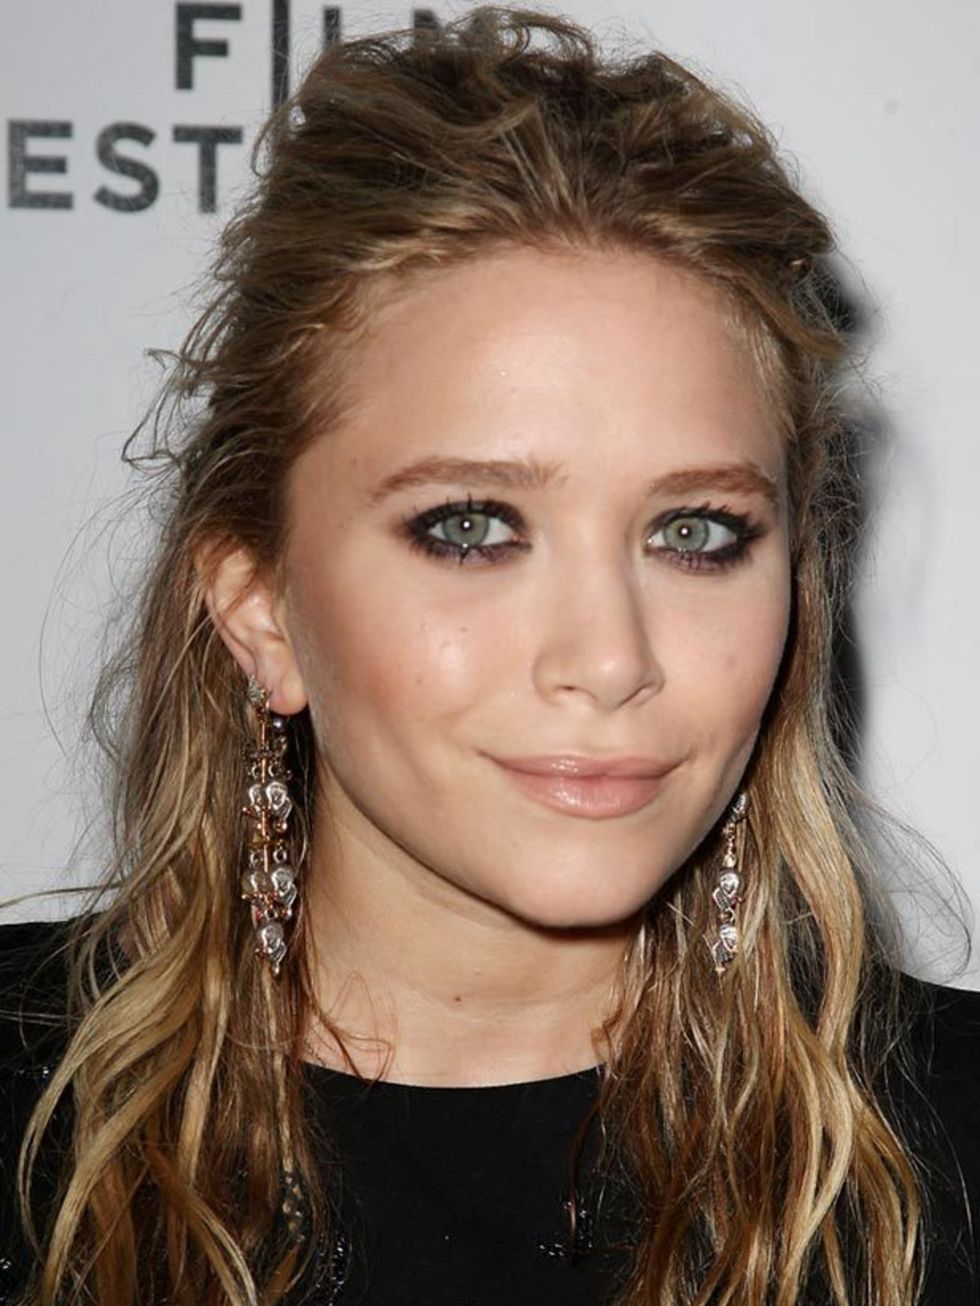 <p><a href="http://www.elleuk.com/beauty/celeb-beauty/celeb-beauty-bags/%28section%29/mary-kate-olsen-favourite-beauty-buys">Click to see Mary-Kate's beauty bag</a></p>